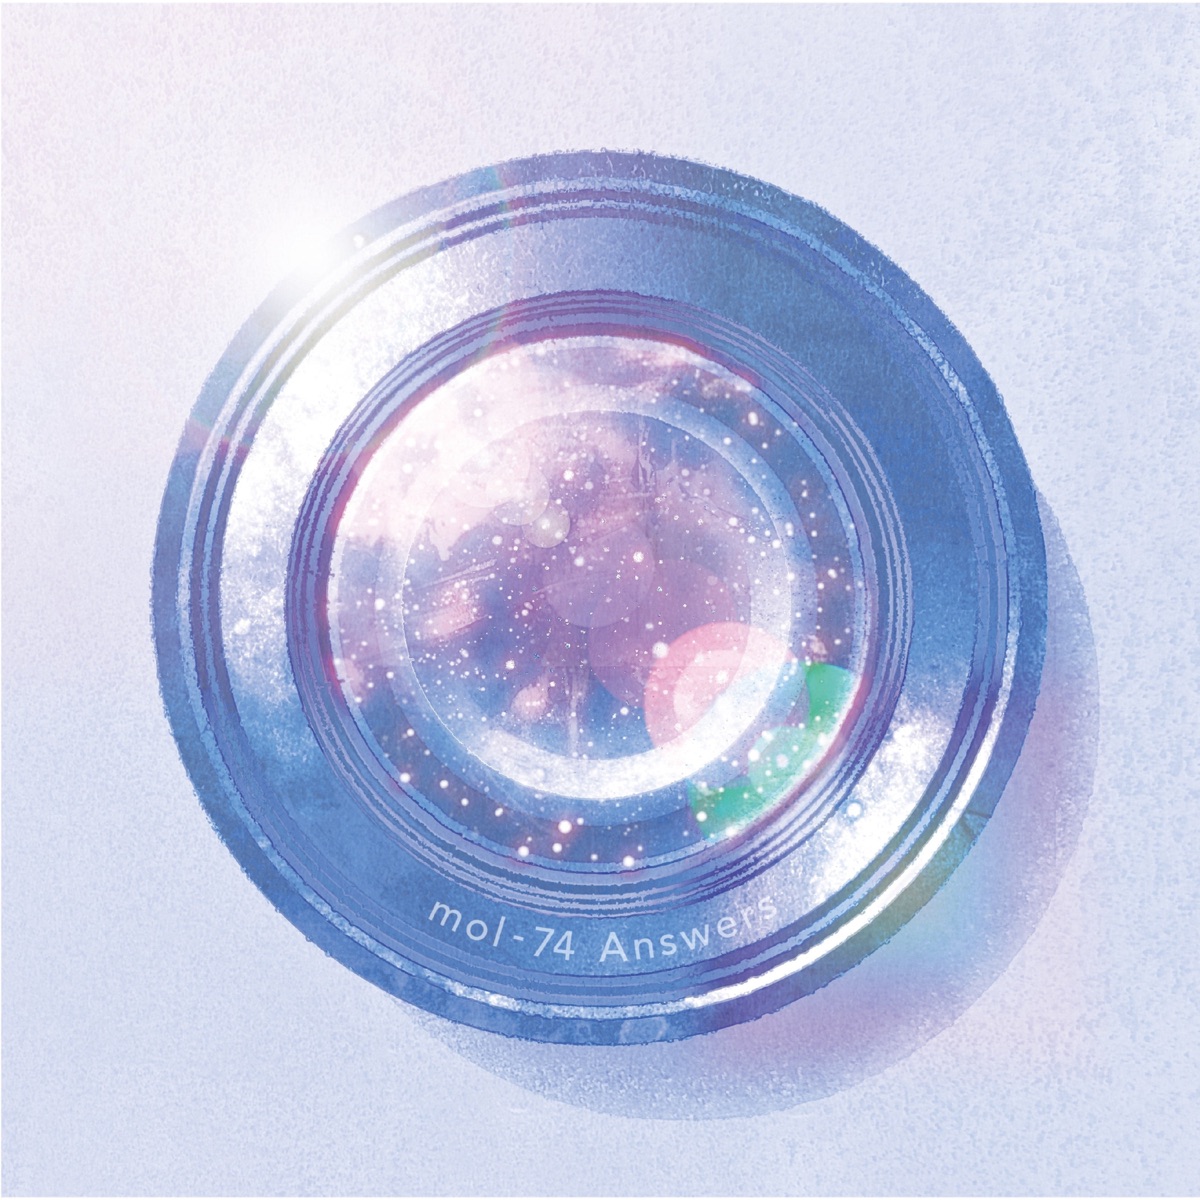 Cover art for『mol-74 - Answers』from the release『Answers』